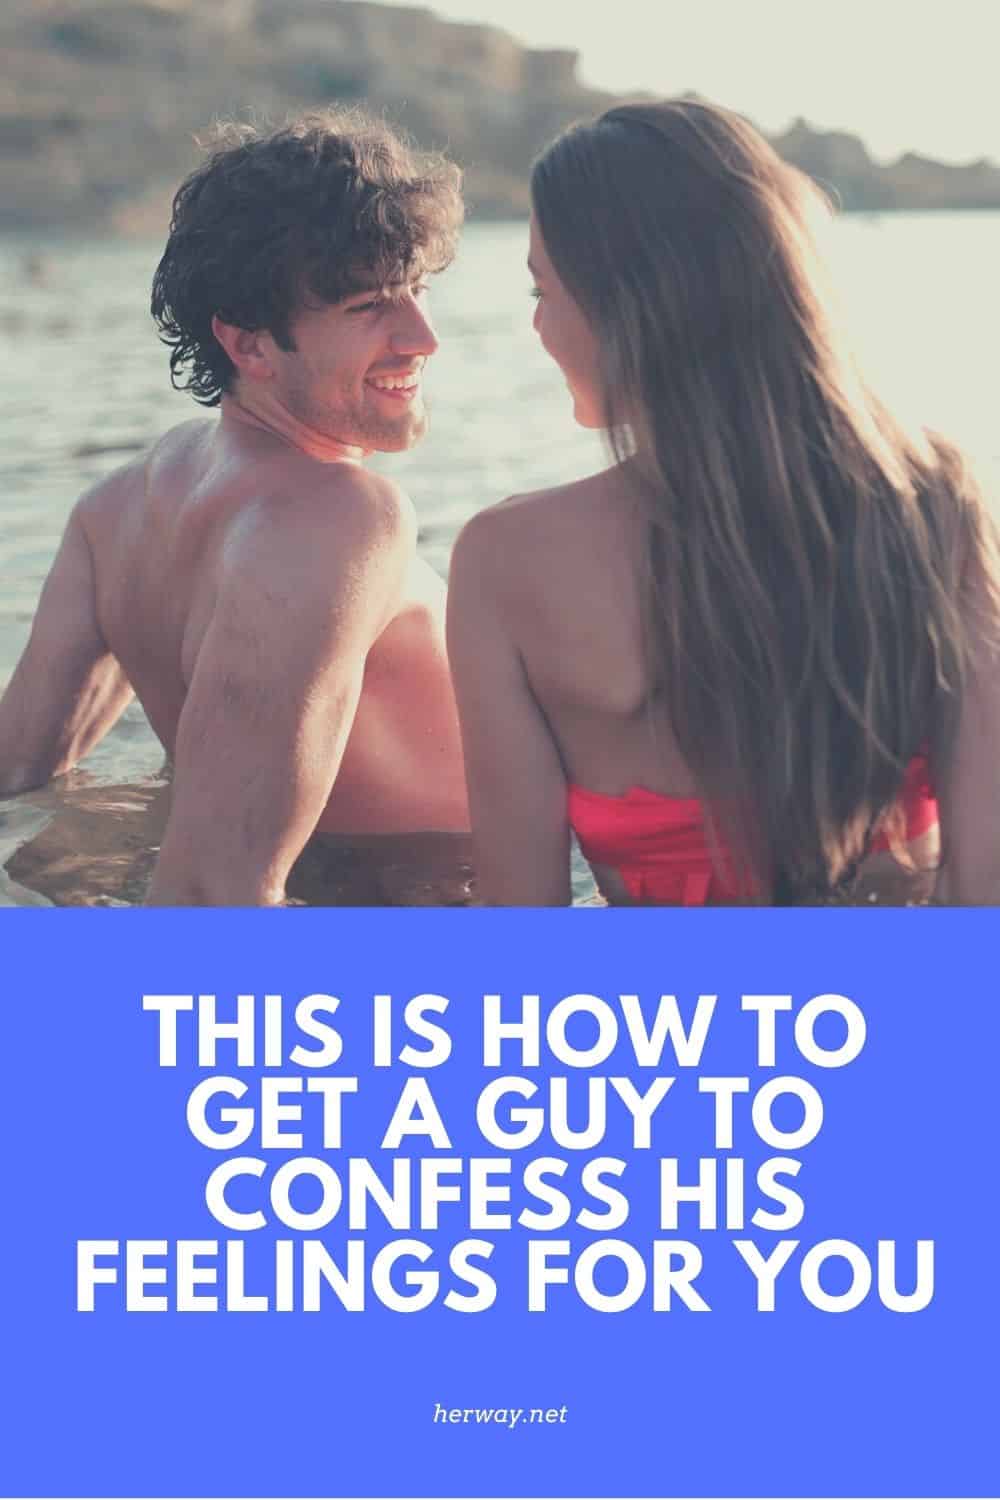 This Is How To Get A Guy To Confess His Feelings For You